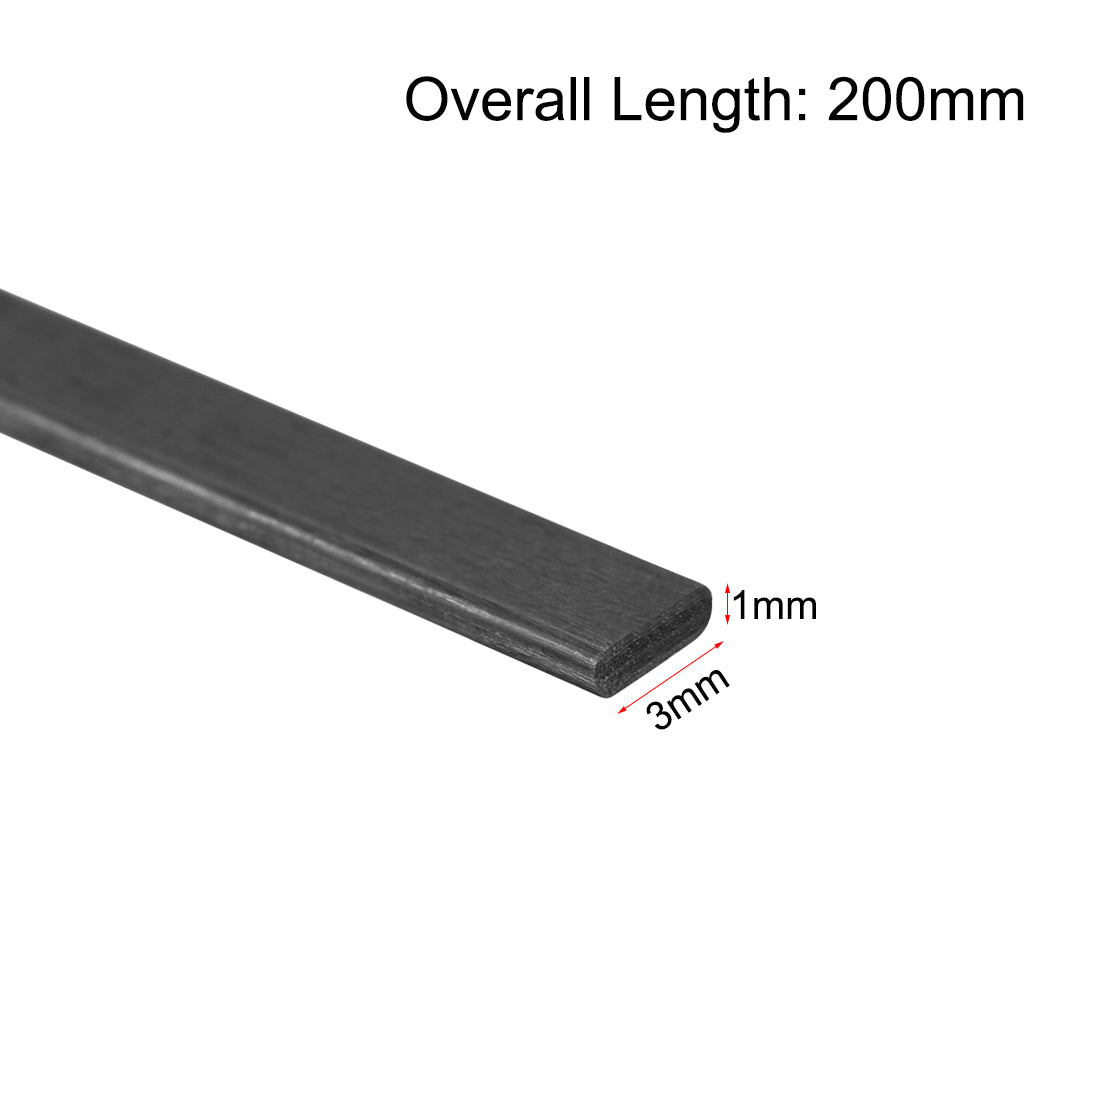 uxcell Uxcell Carbon Fiber Strip Bars 1x3mm 200mm Length Pultruded Carbon Fiber Strips for Kites, RC Airplane 2 Pcs